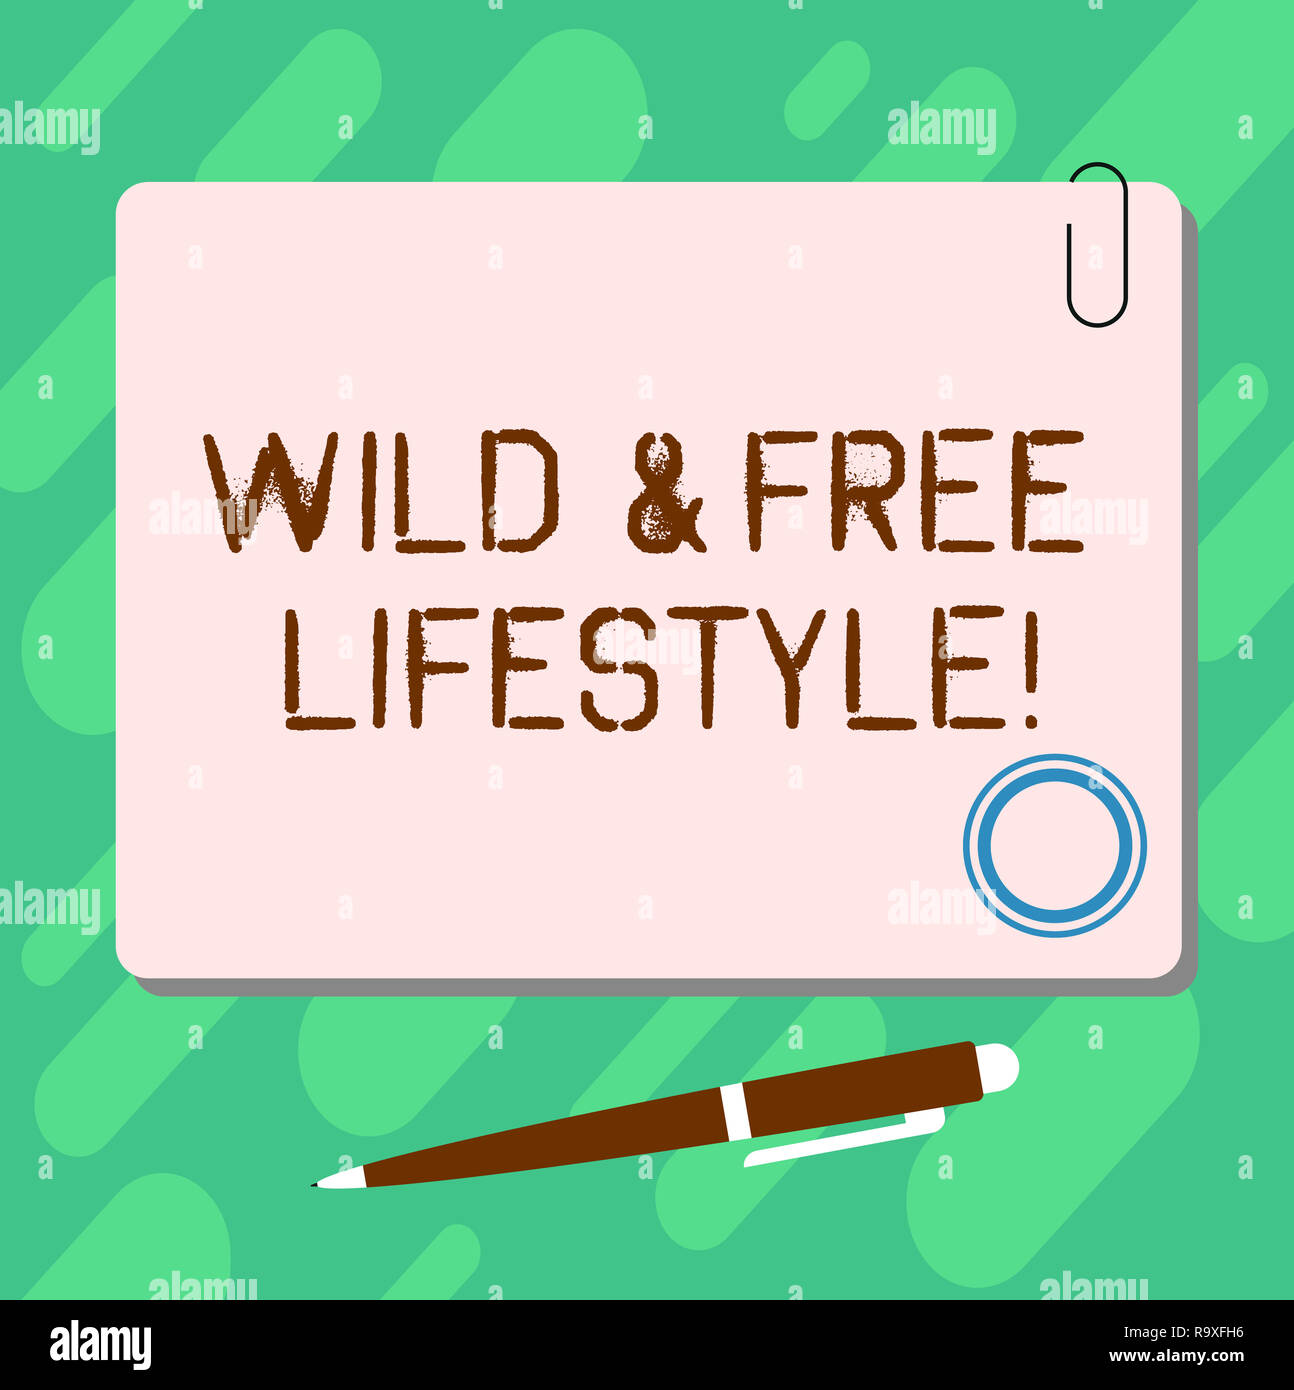 Wild & Free: What it means